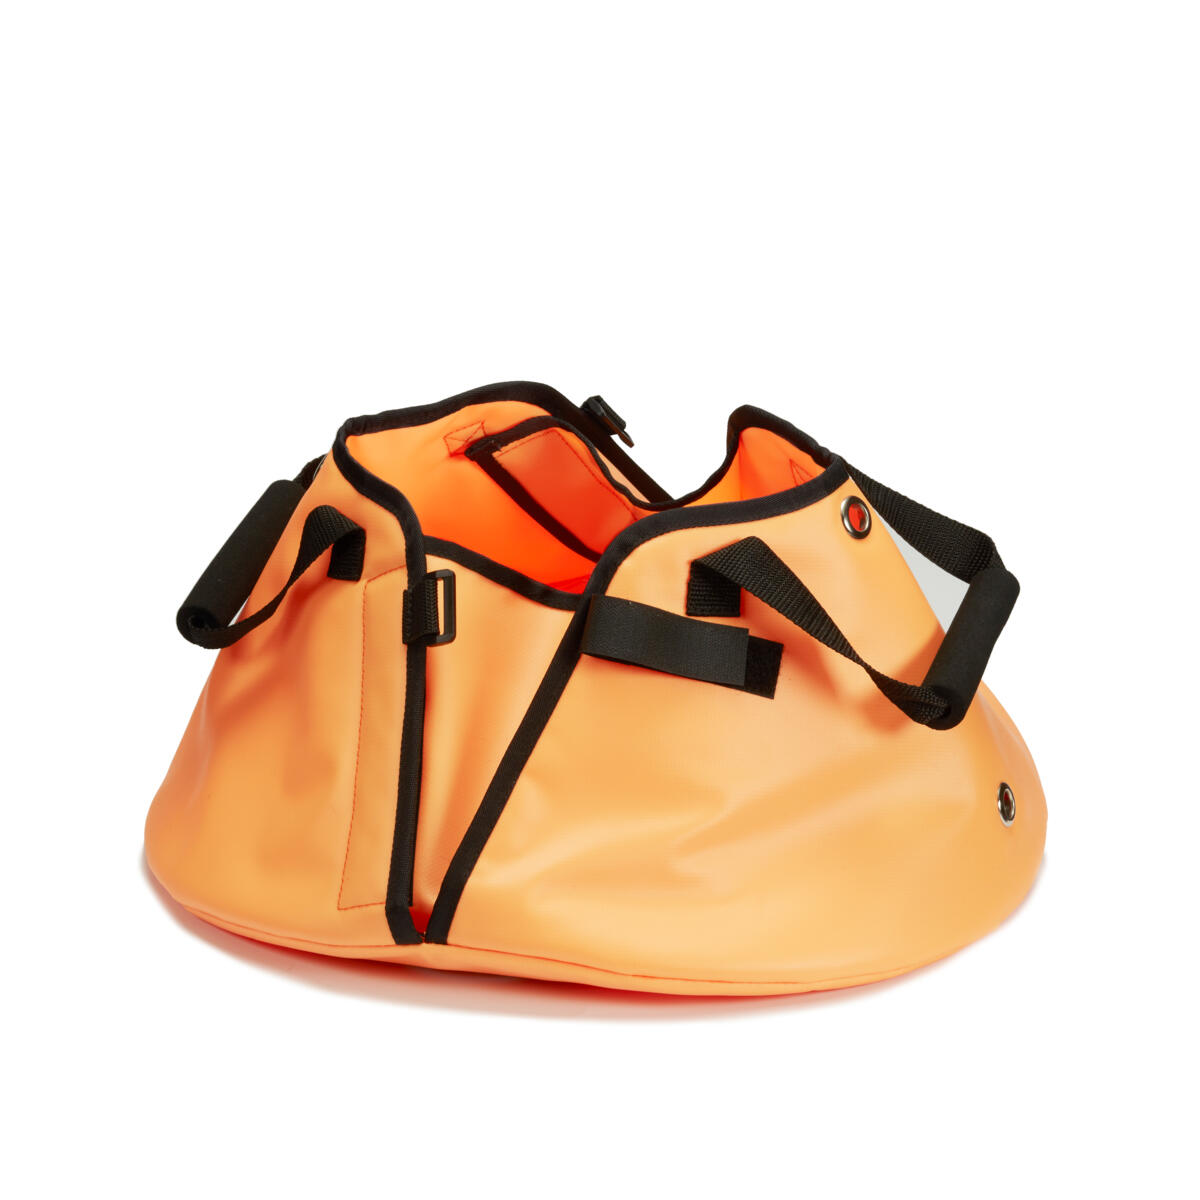 Made of Hi-Vis orange Ripstop nylon, this bag is designed for  trailering and long term storage. As more and more countries are mandating the coverage of the propeller, during the transportation of a boat, this high quality bag is a necessity for  any boating enthusiast. The padding, the adjustability and the ease of installation, also make it an obvious choice.